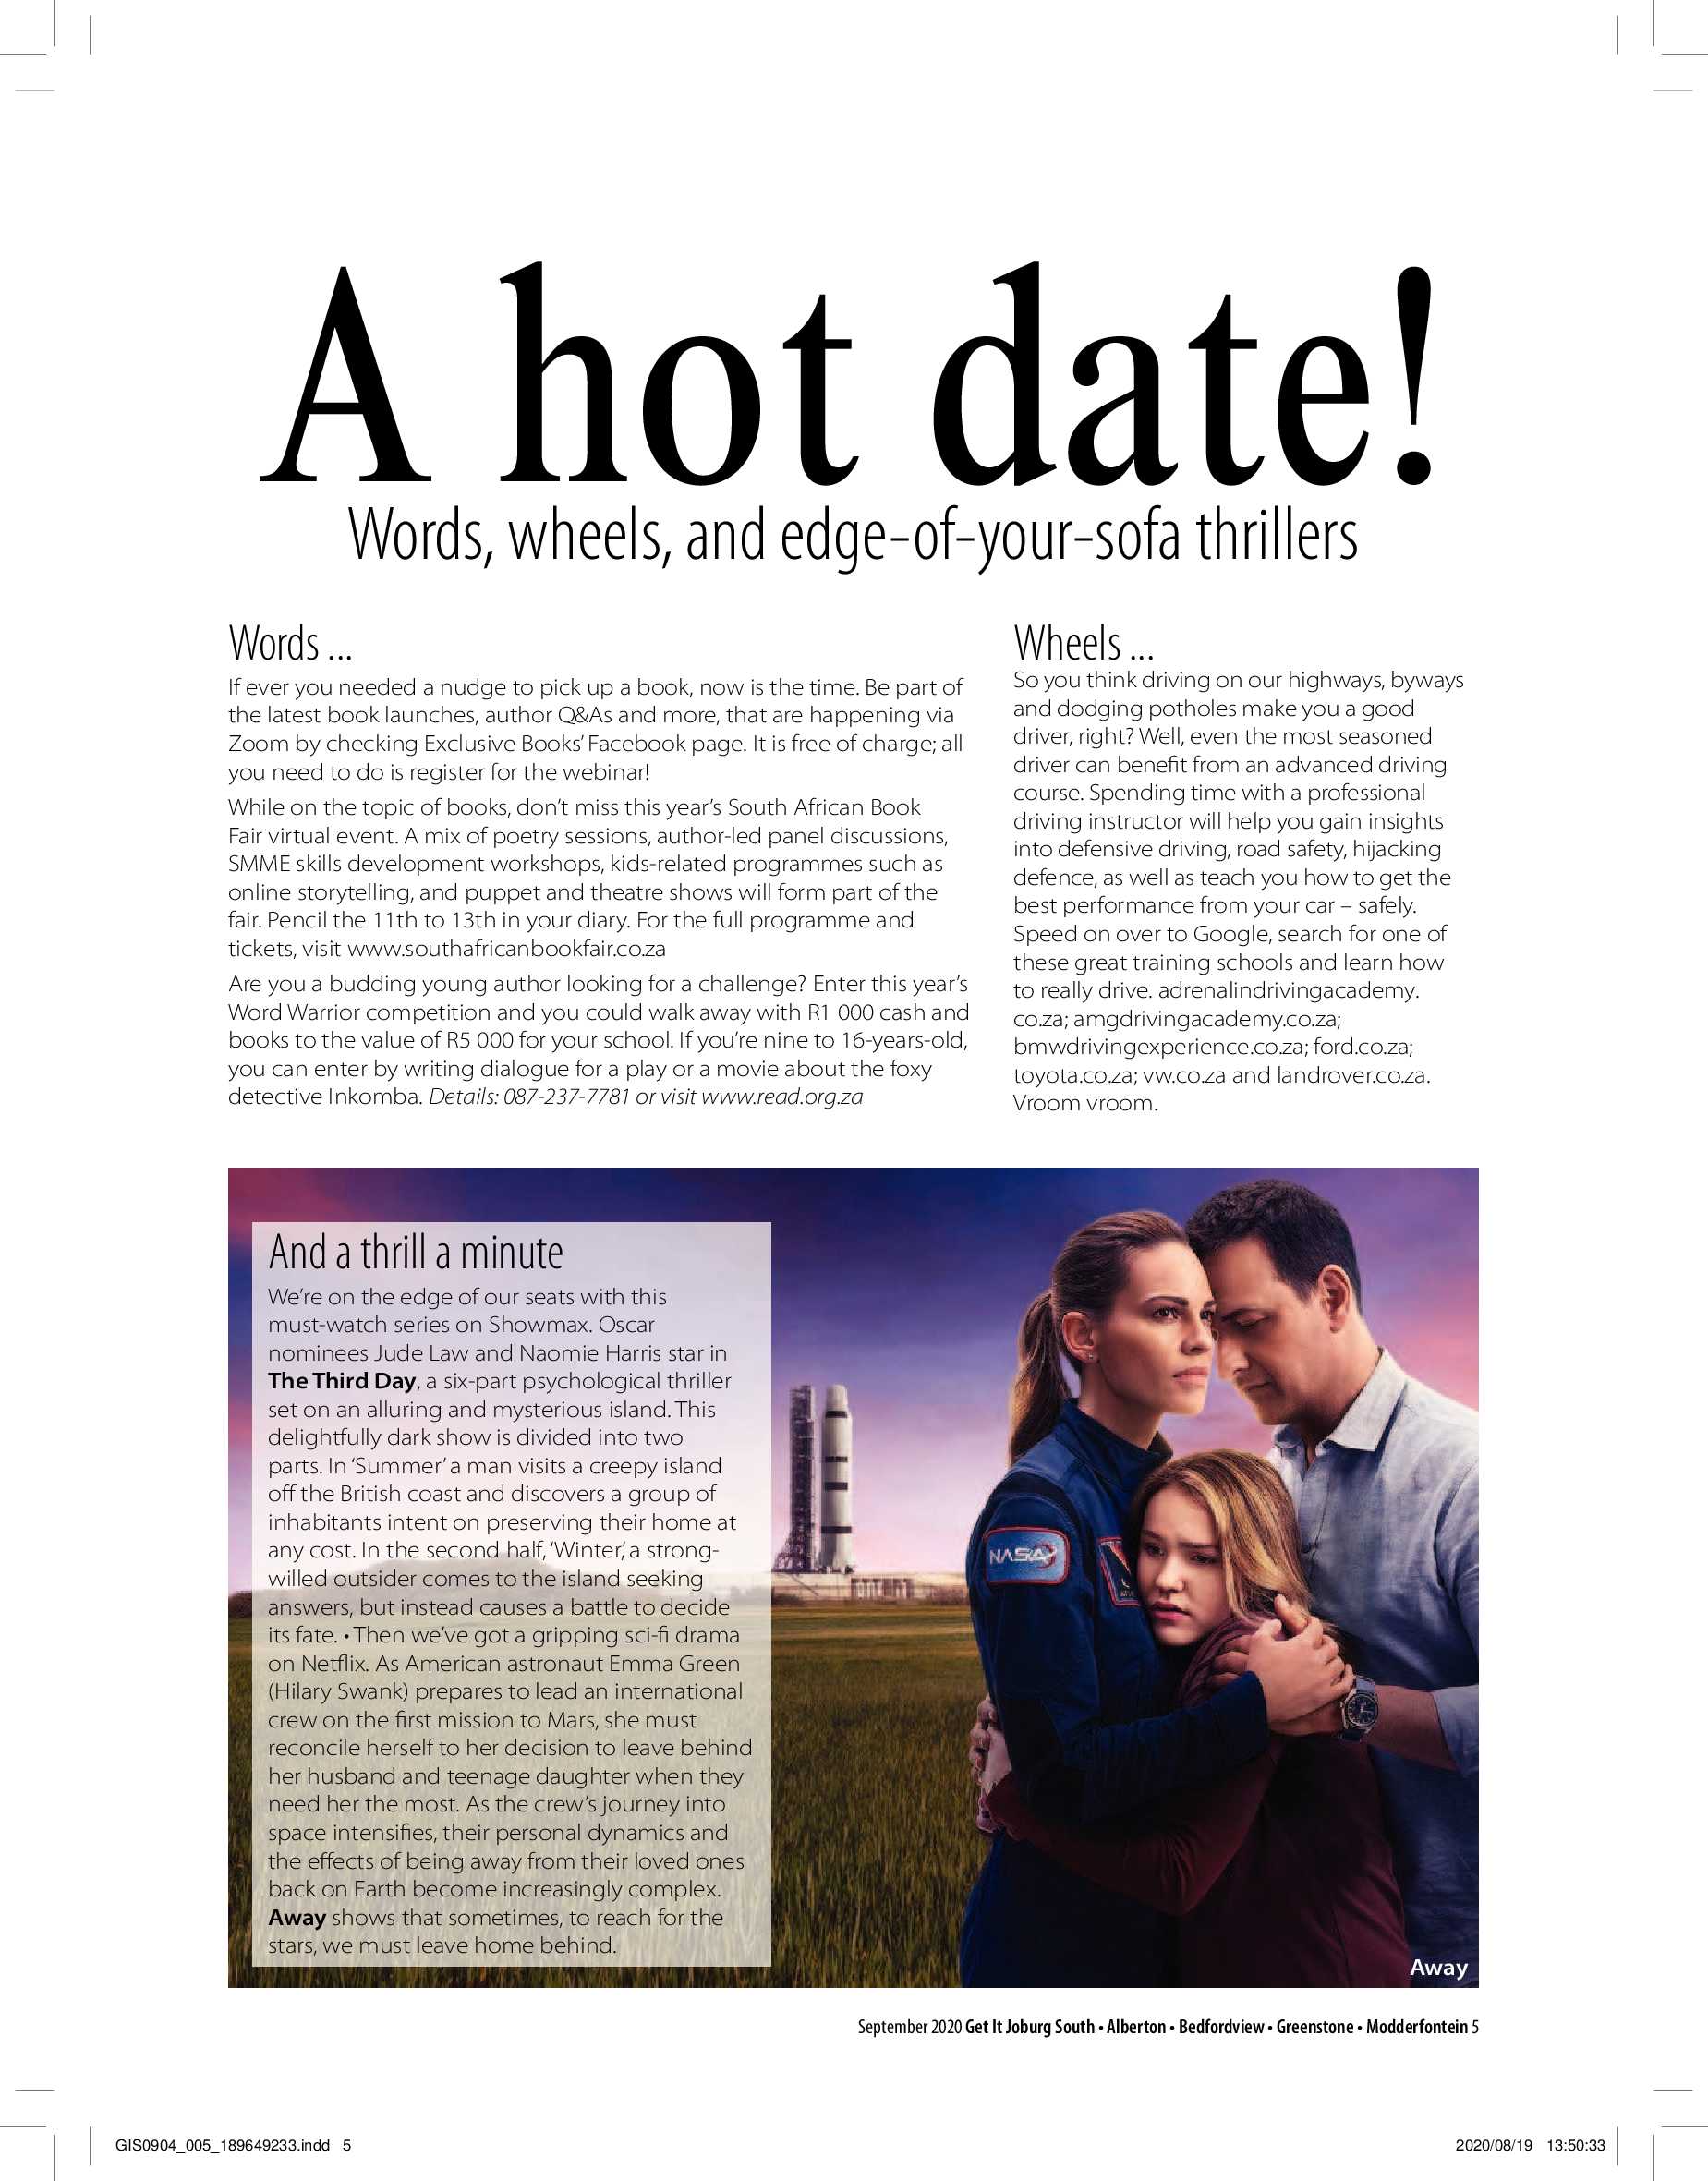 Get It Magazine-September 2020 page 5